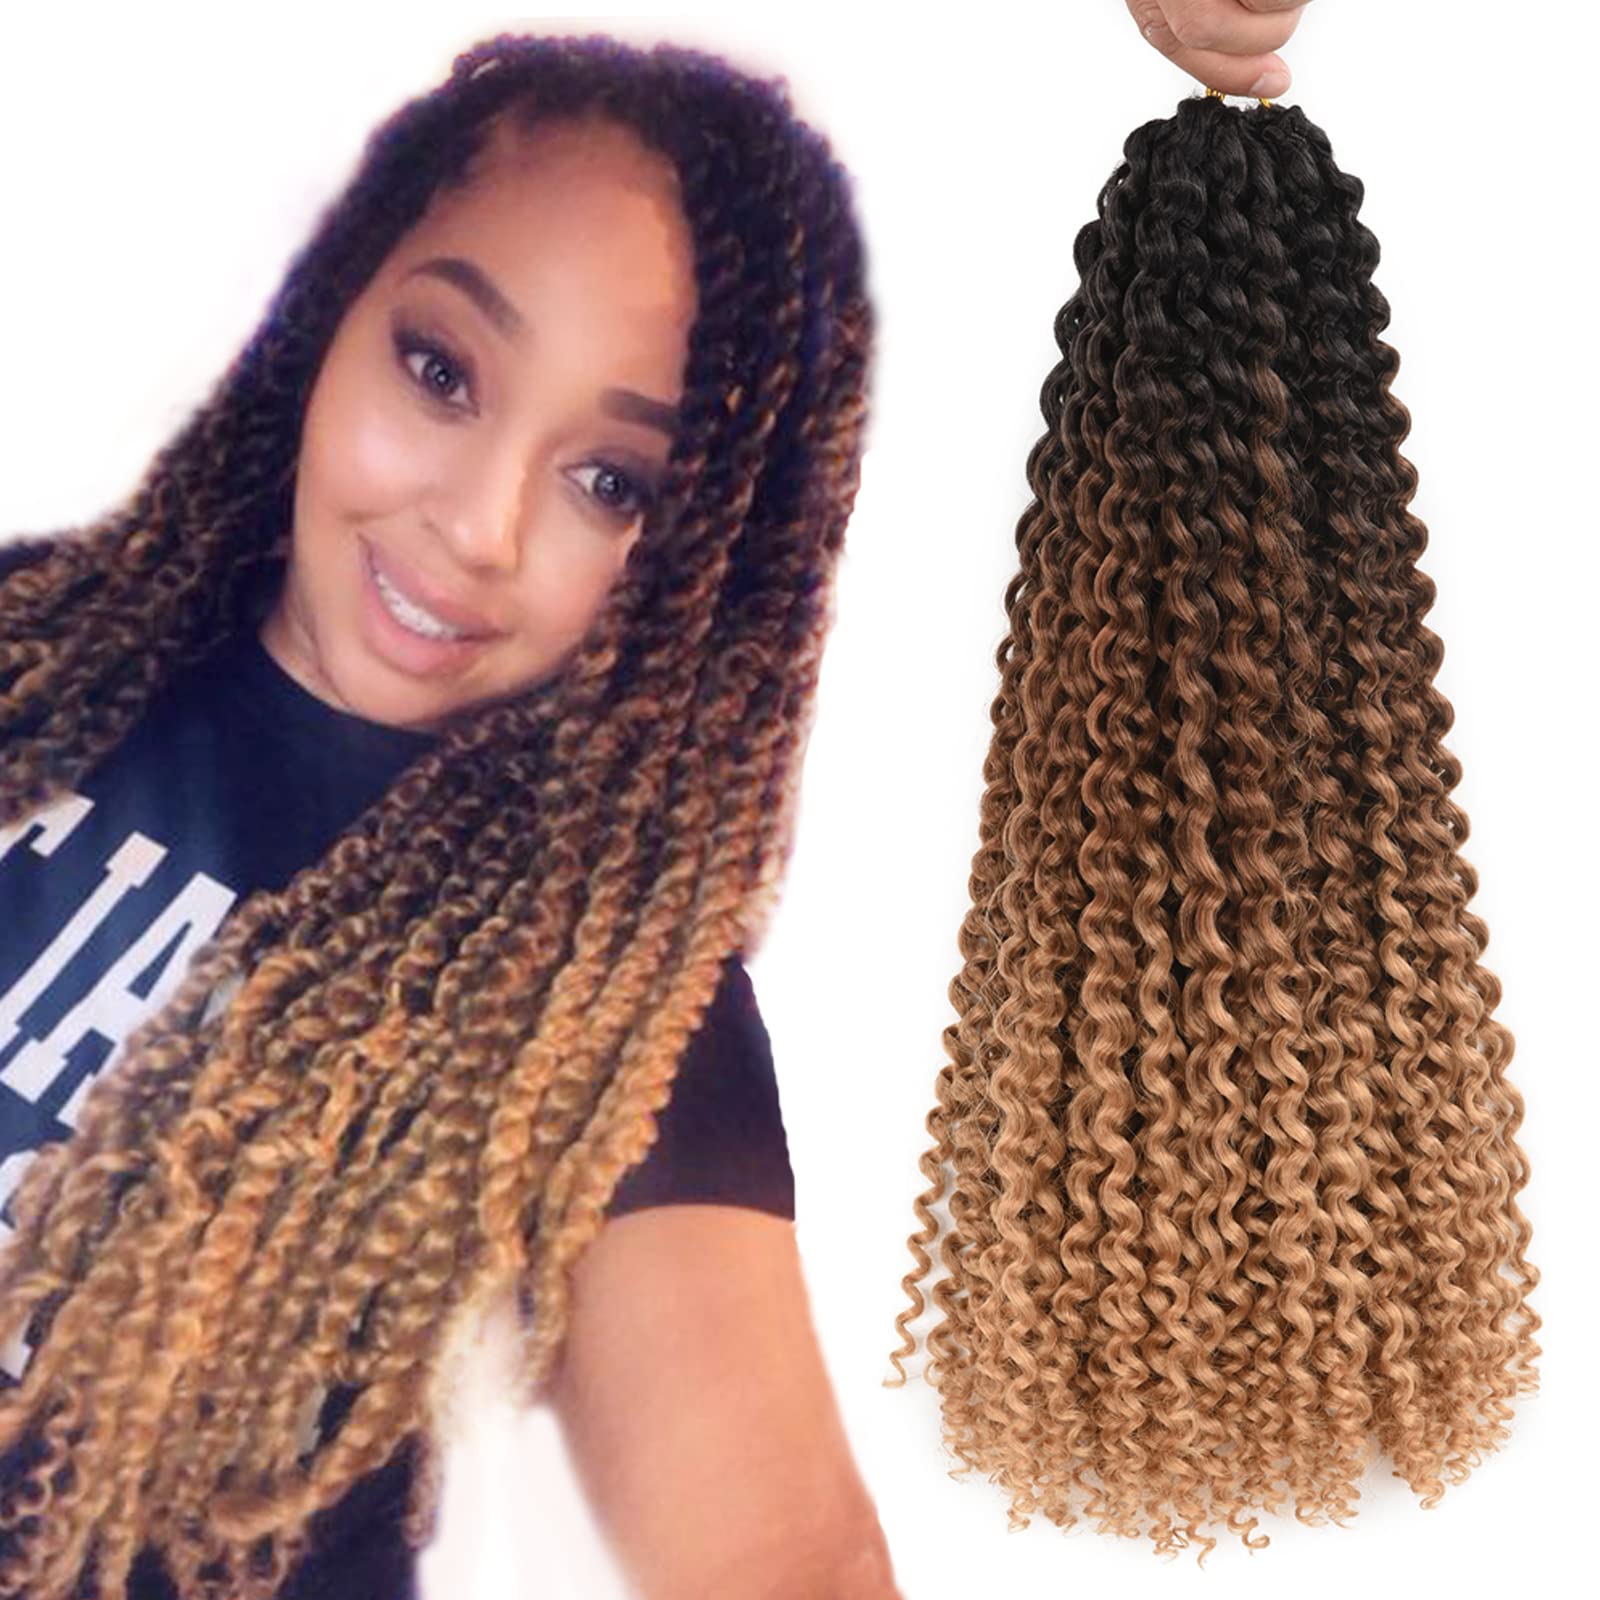 Passion Twist Hair Water Wave Crochet Hair For Black Women 18 Inch